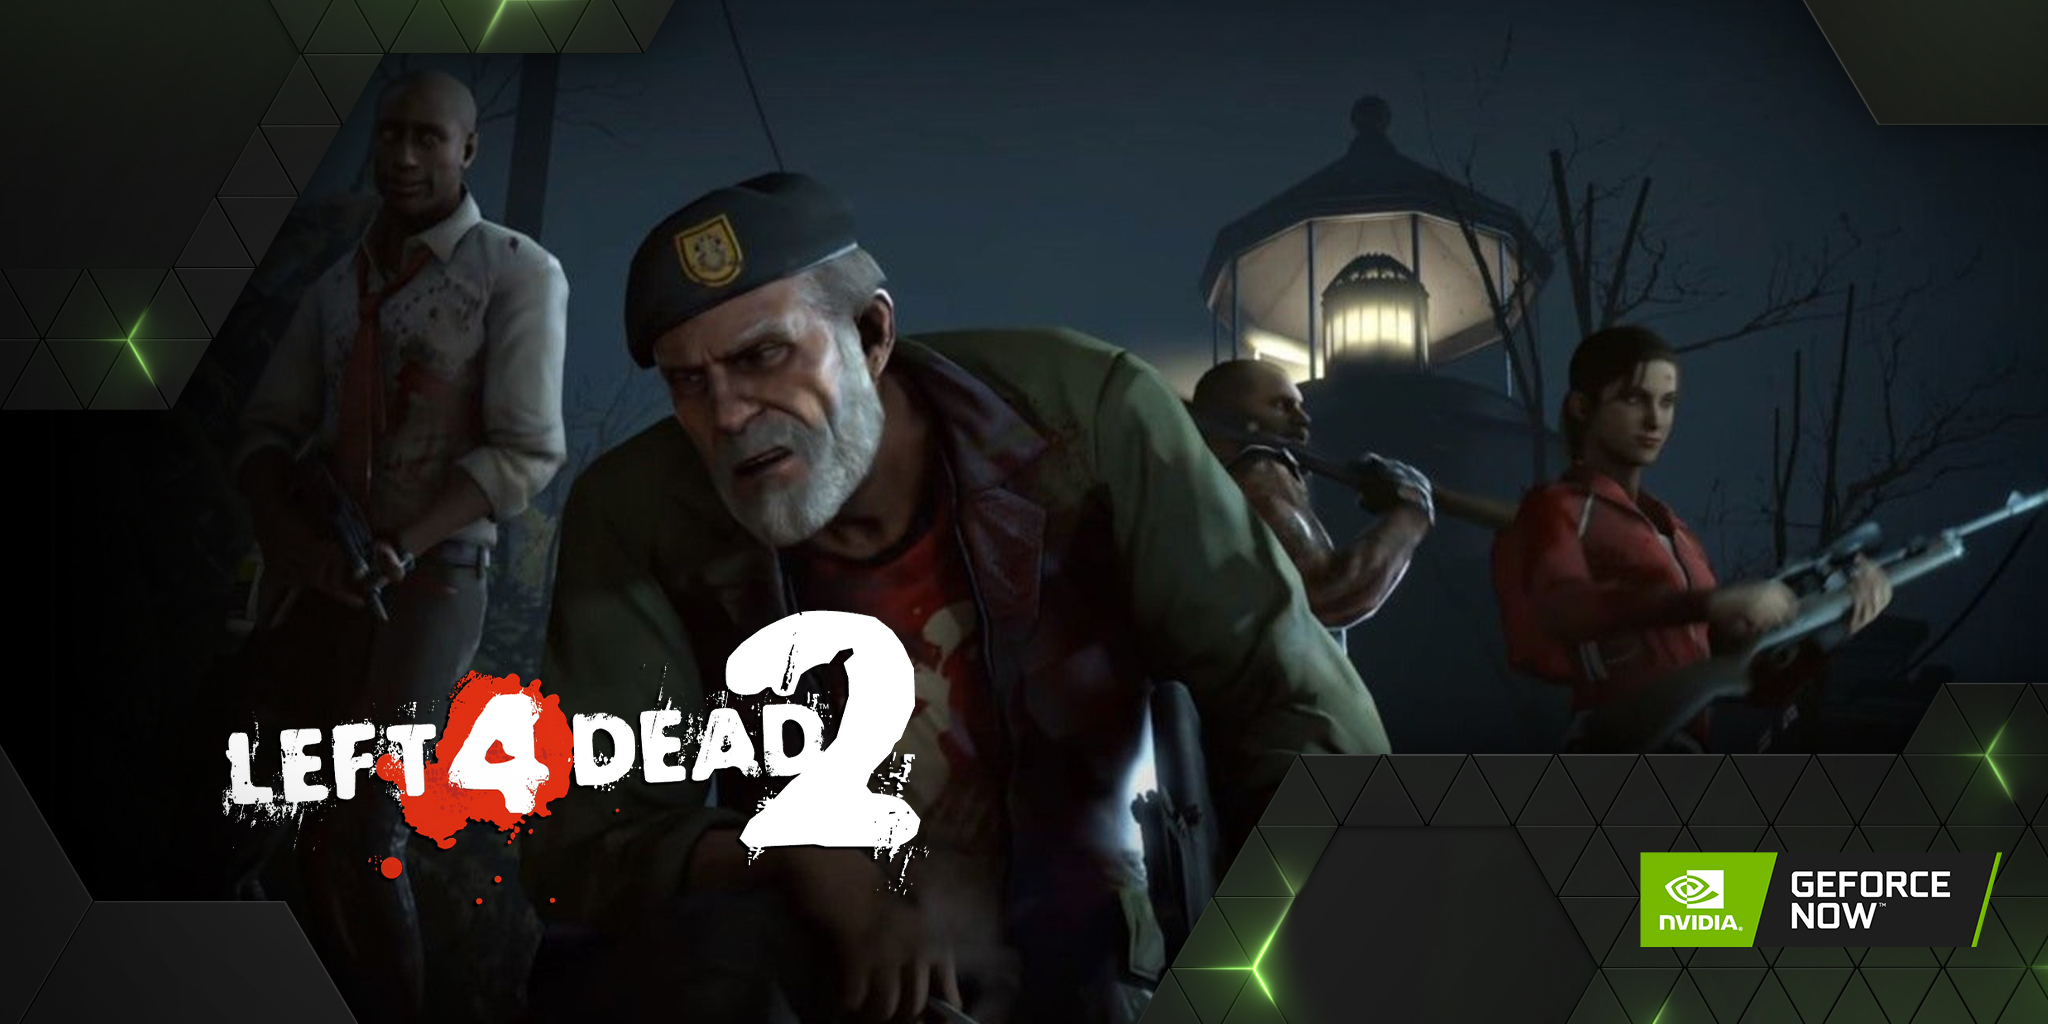 left 4 dead 2 last stand